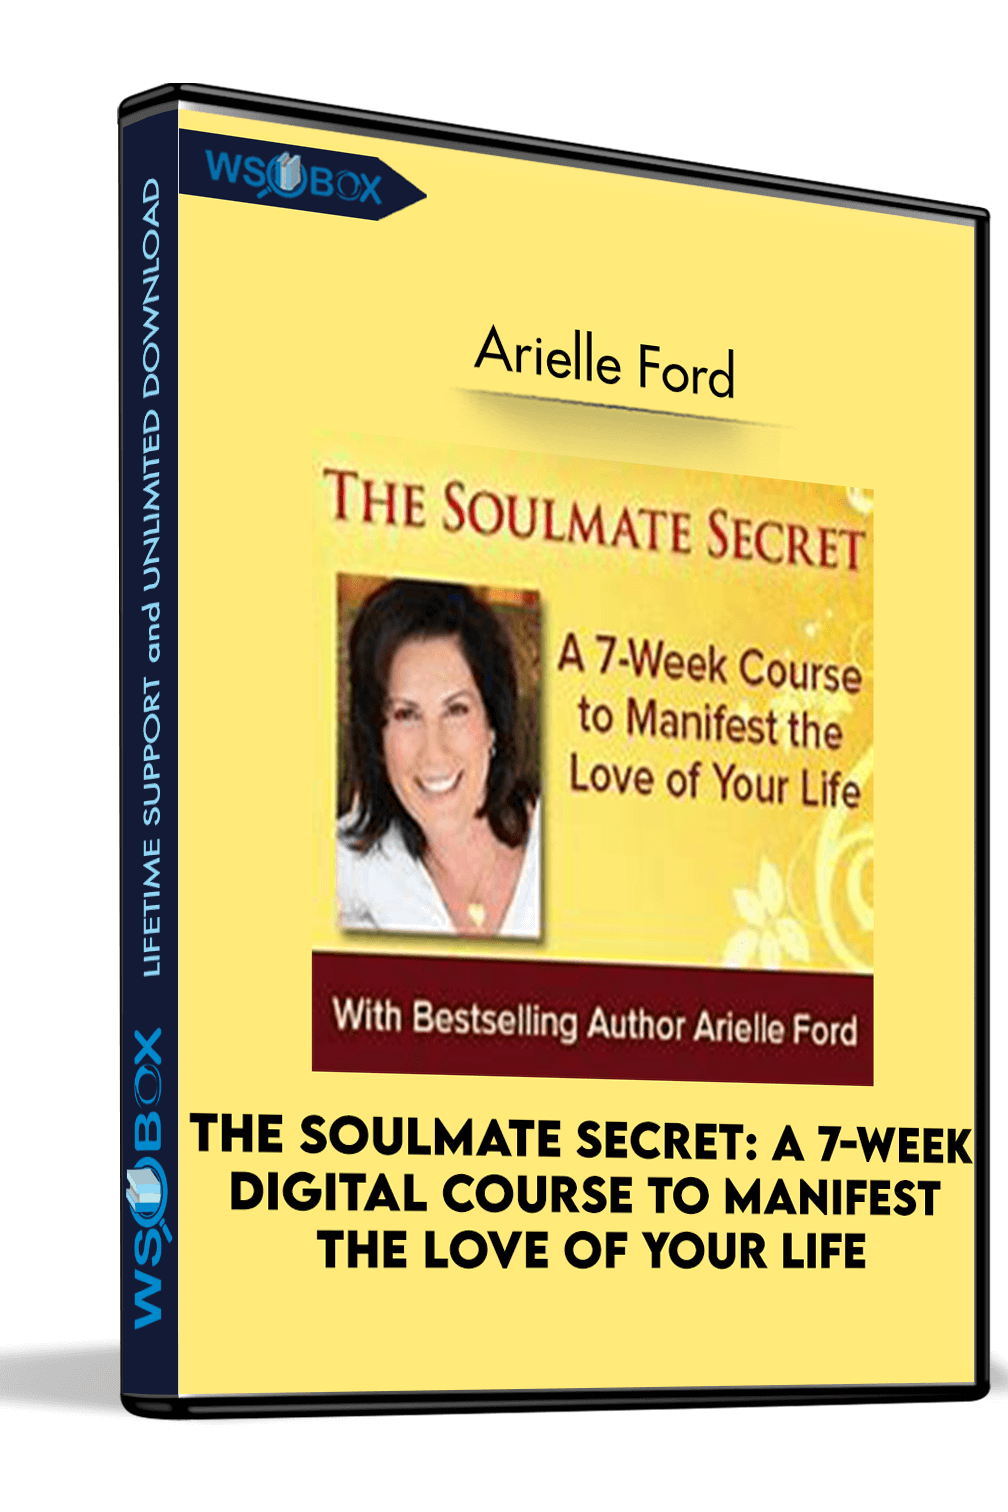 the-soulmate-secret-a-7-week-digital-course-to-manifest-the-love-of-your-life-arielle-ford